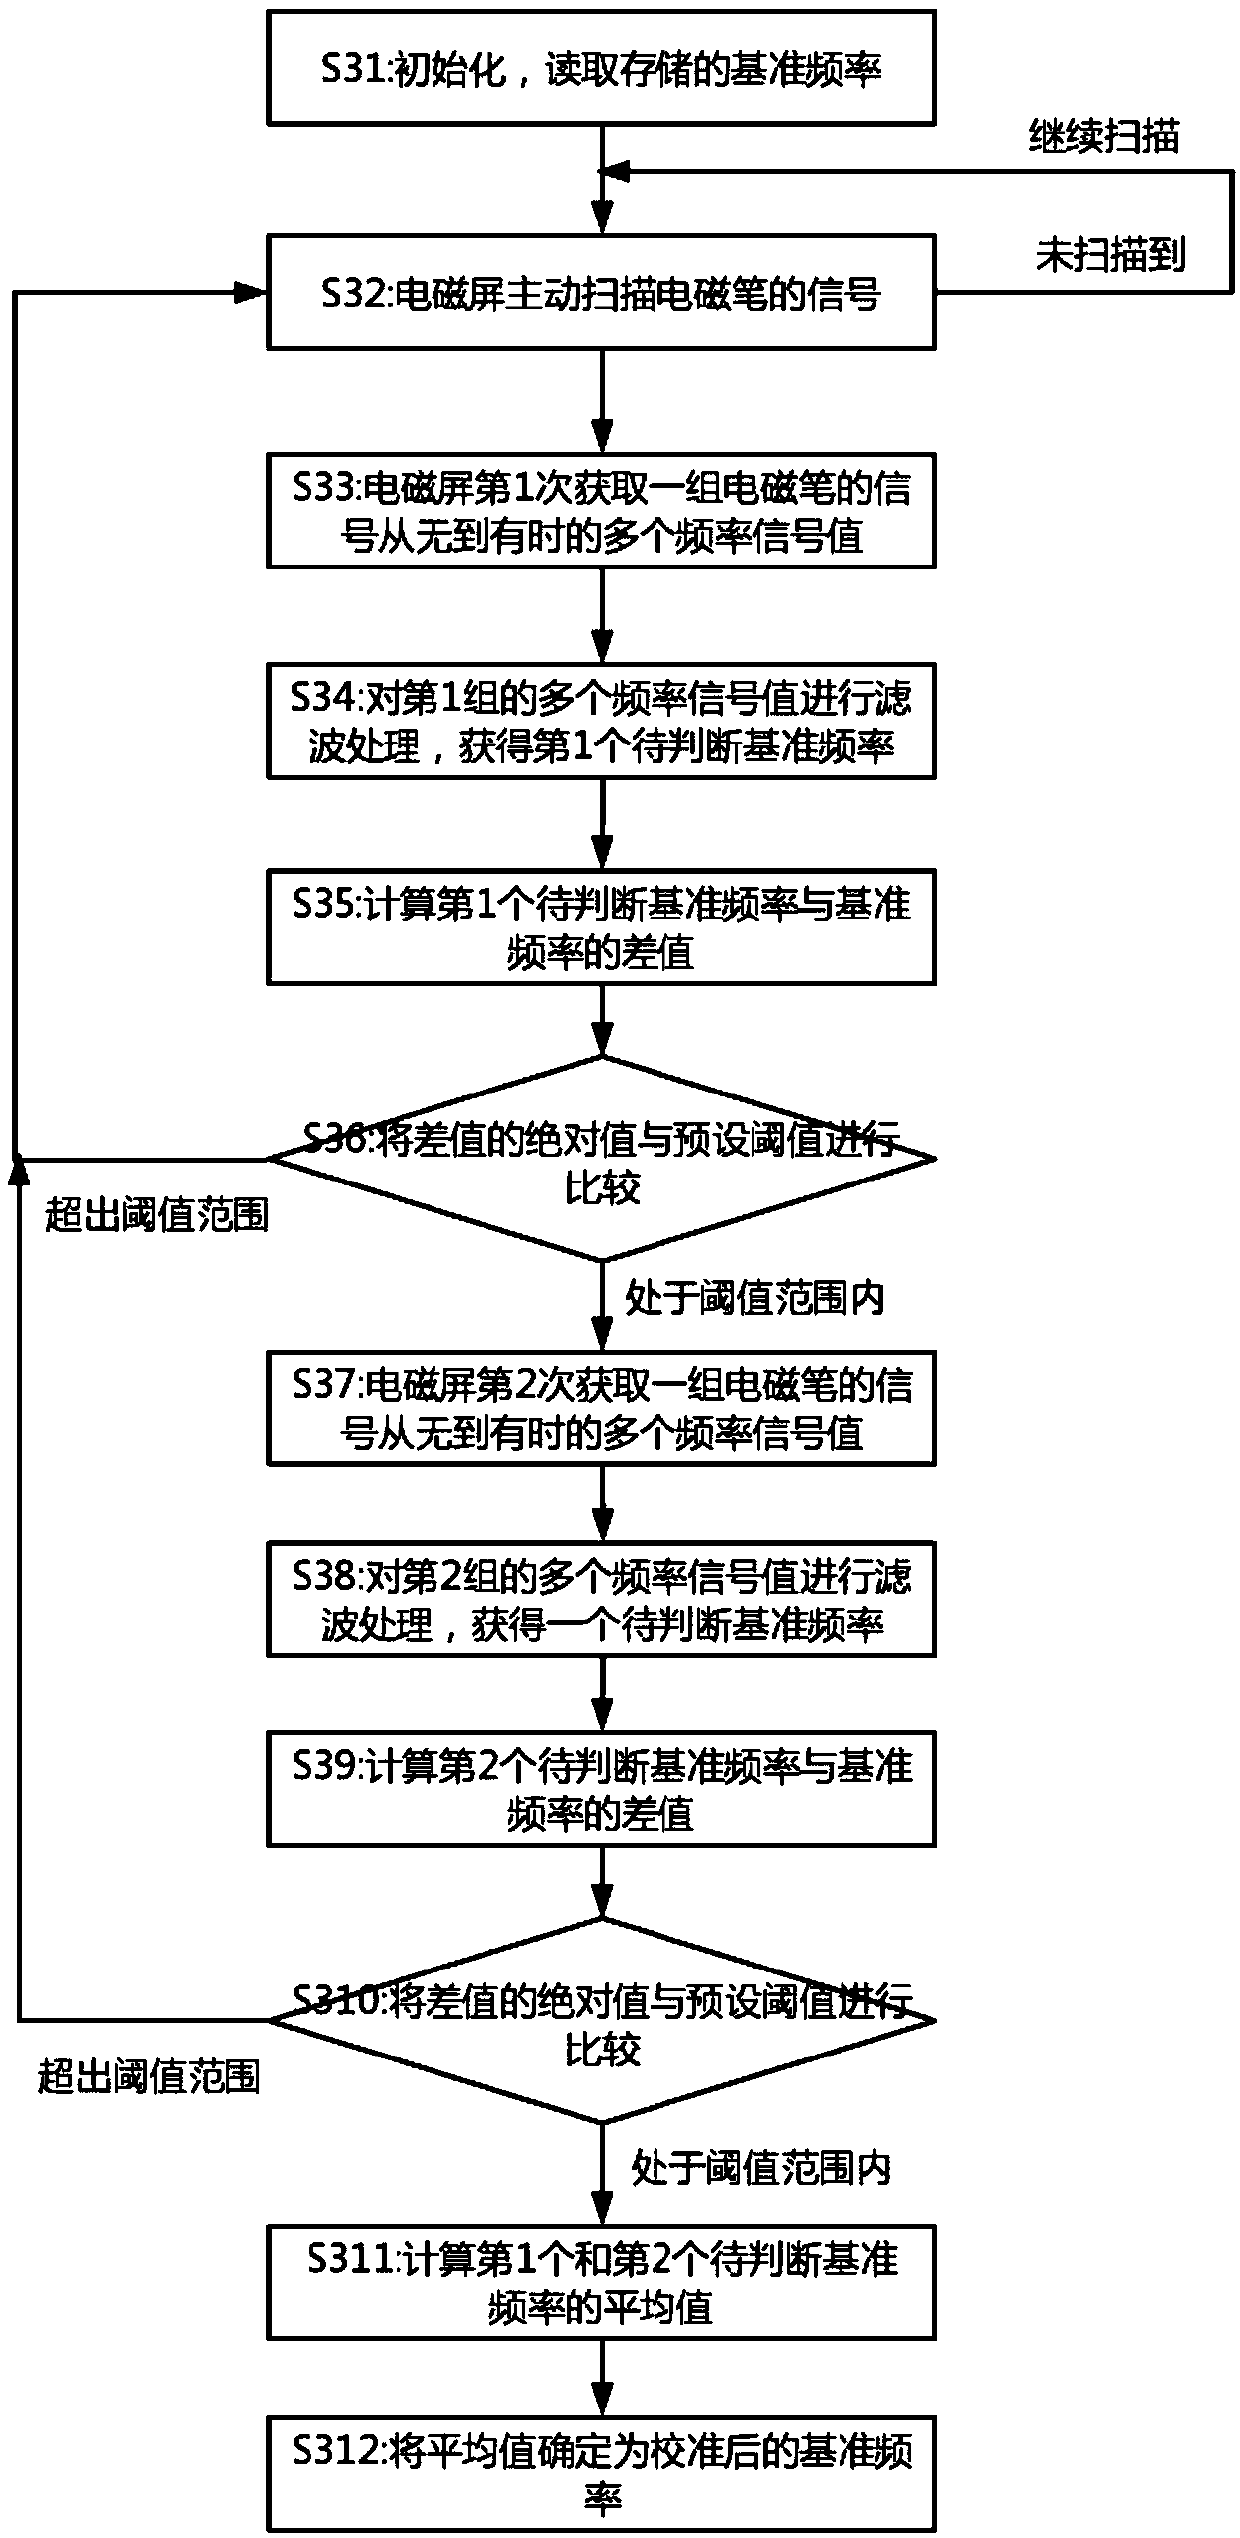 Reference frequency automatic calibration method of an electromagnetic pen